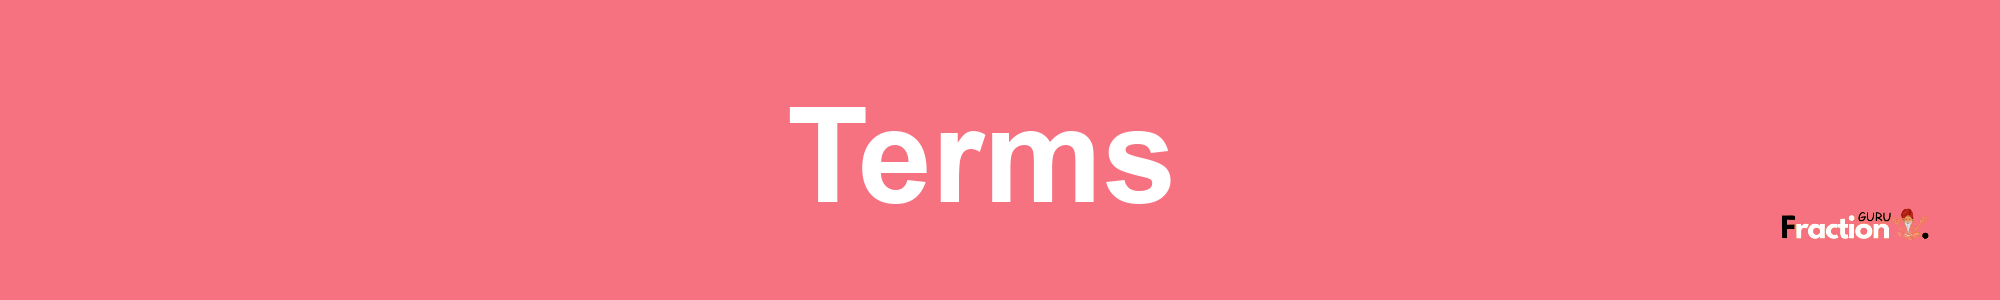 Terms & Conditions | FractionGuru